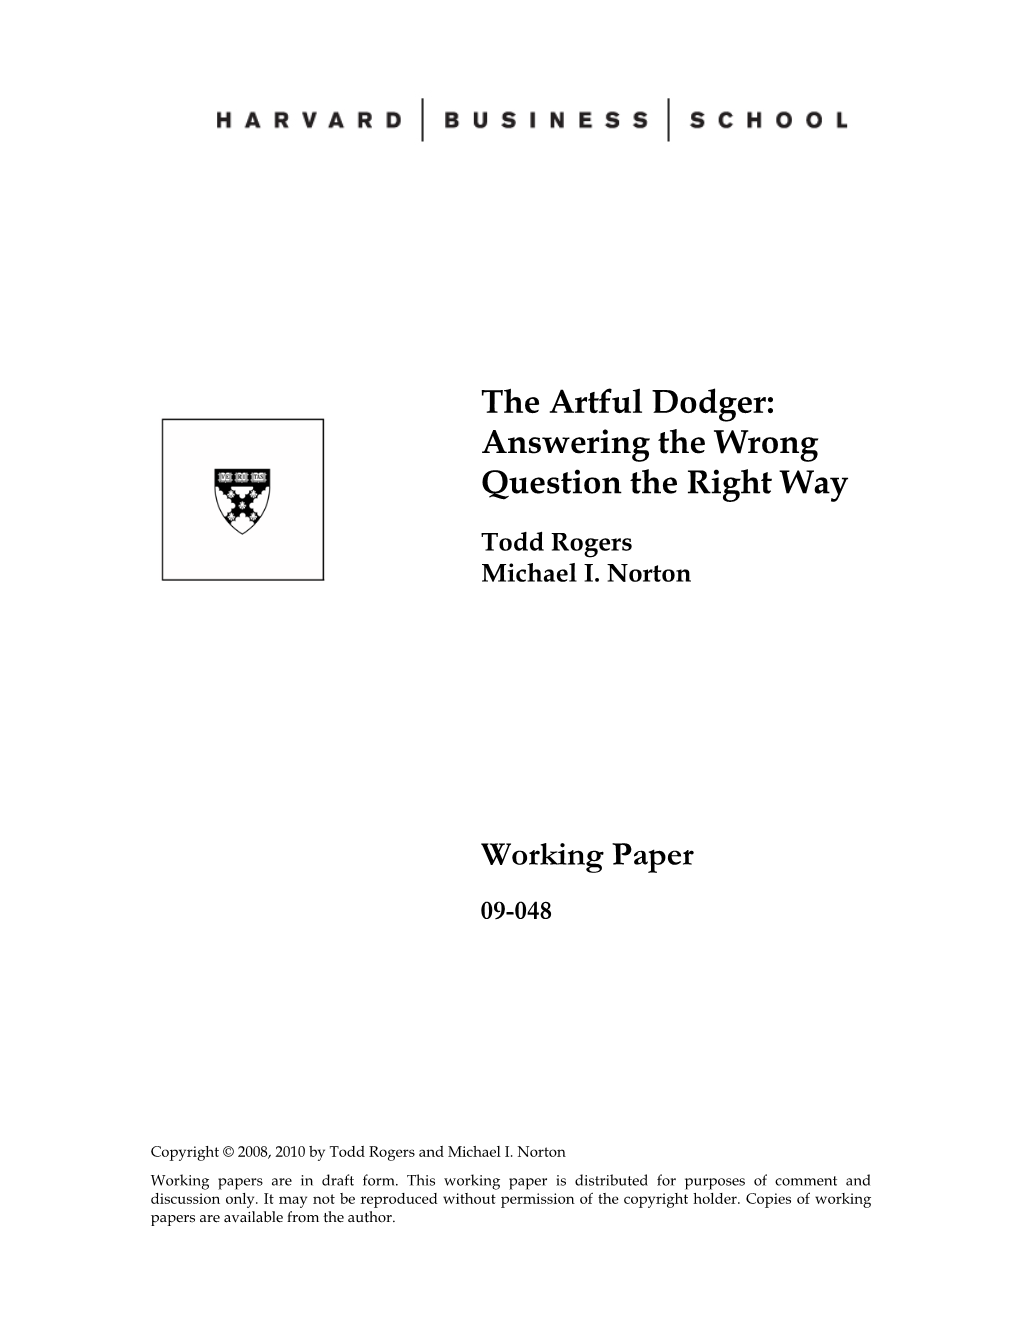 The Artful Dodger: Answering the Wrong Question the Right Way Working Paper